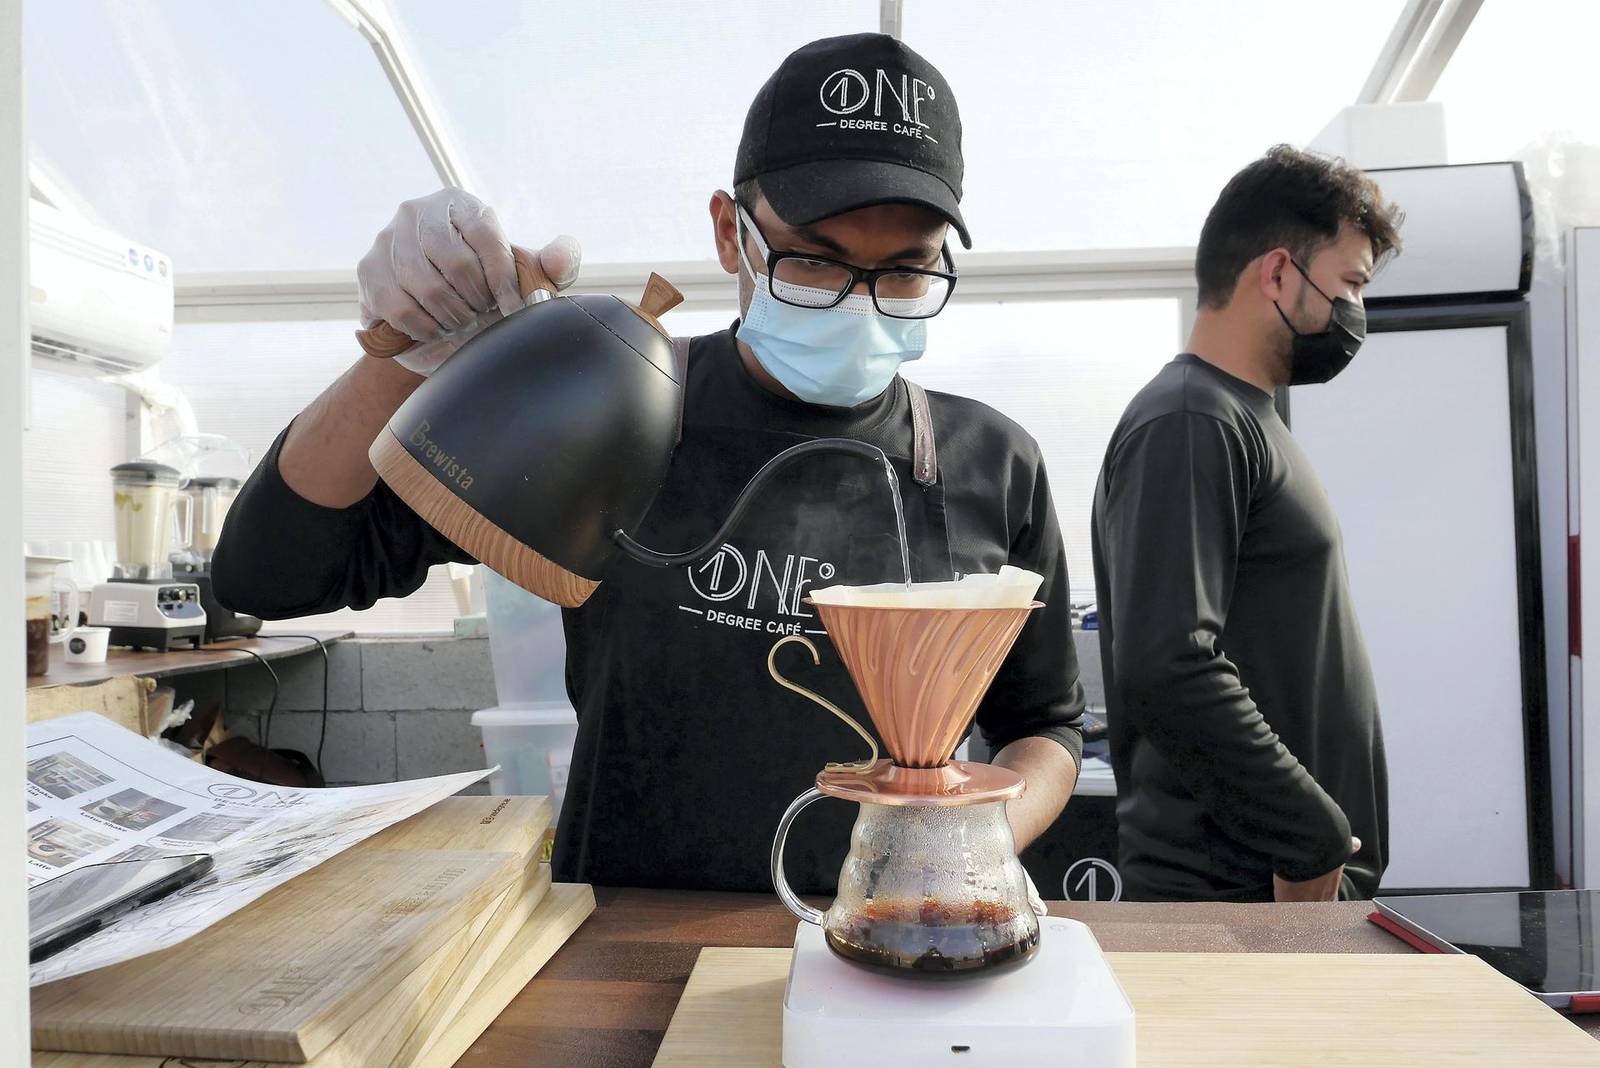 one-degree-uae-winter-pop-up-cafe-offers-stunning-desert-views-and